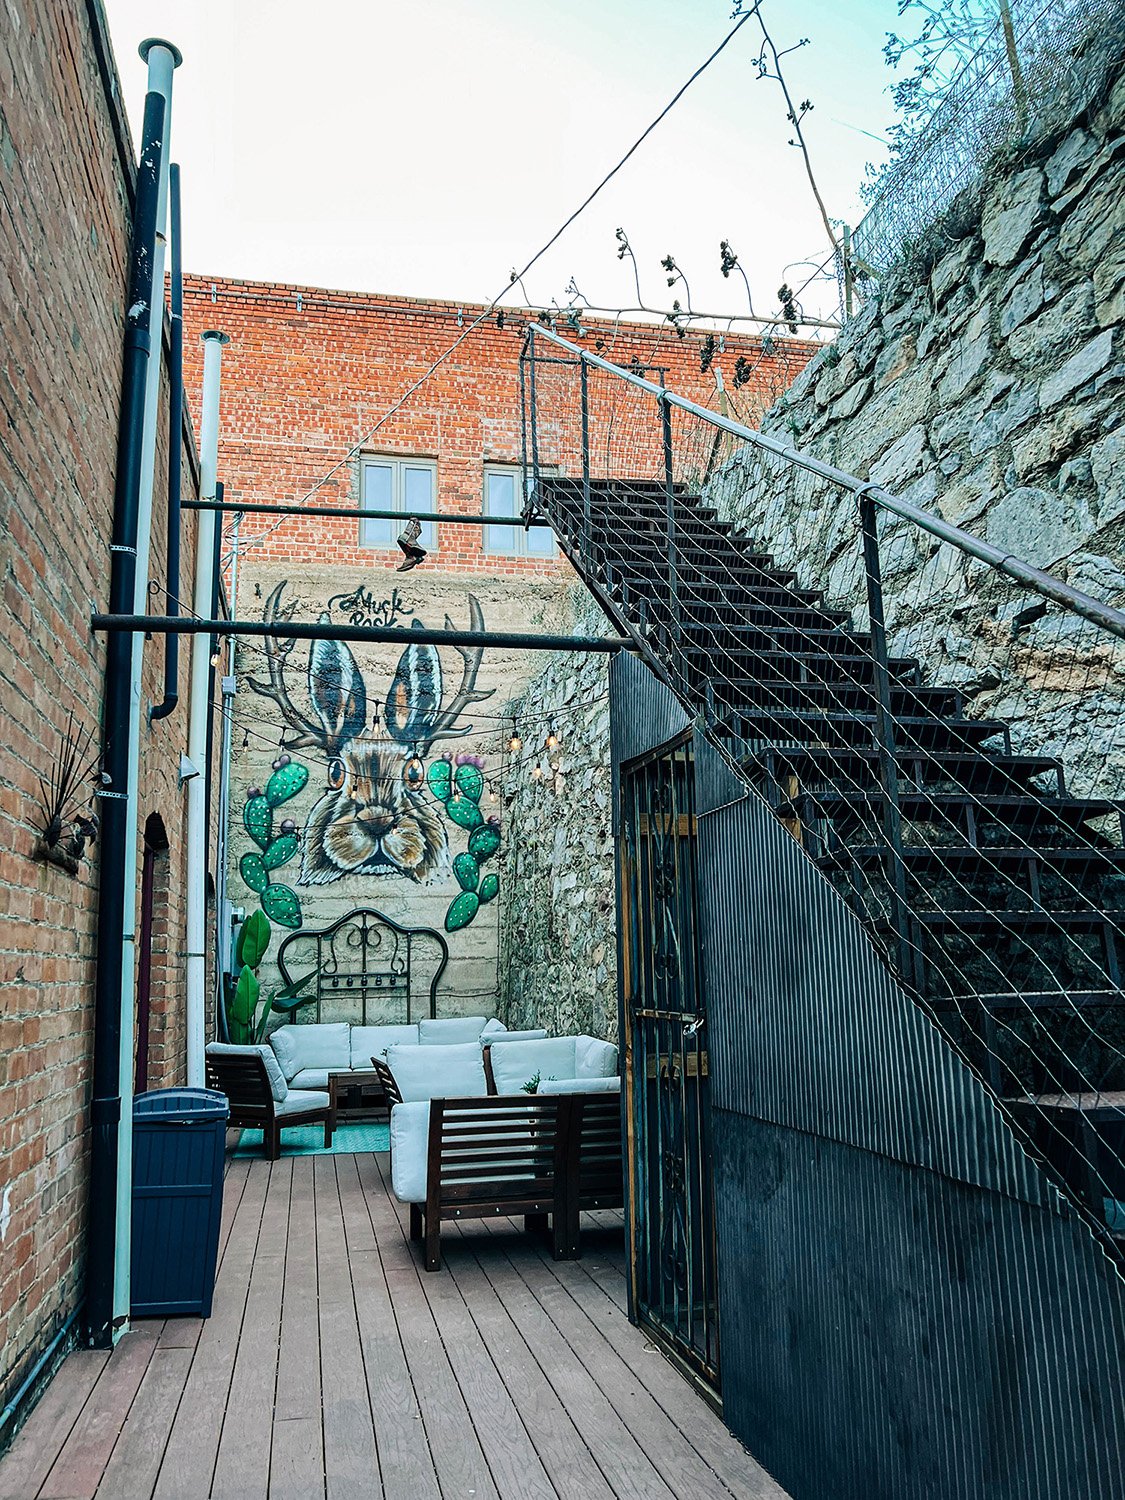 A small patio with a jackalope mural in a hotel in Bisbee, Arizona.